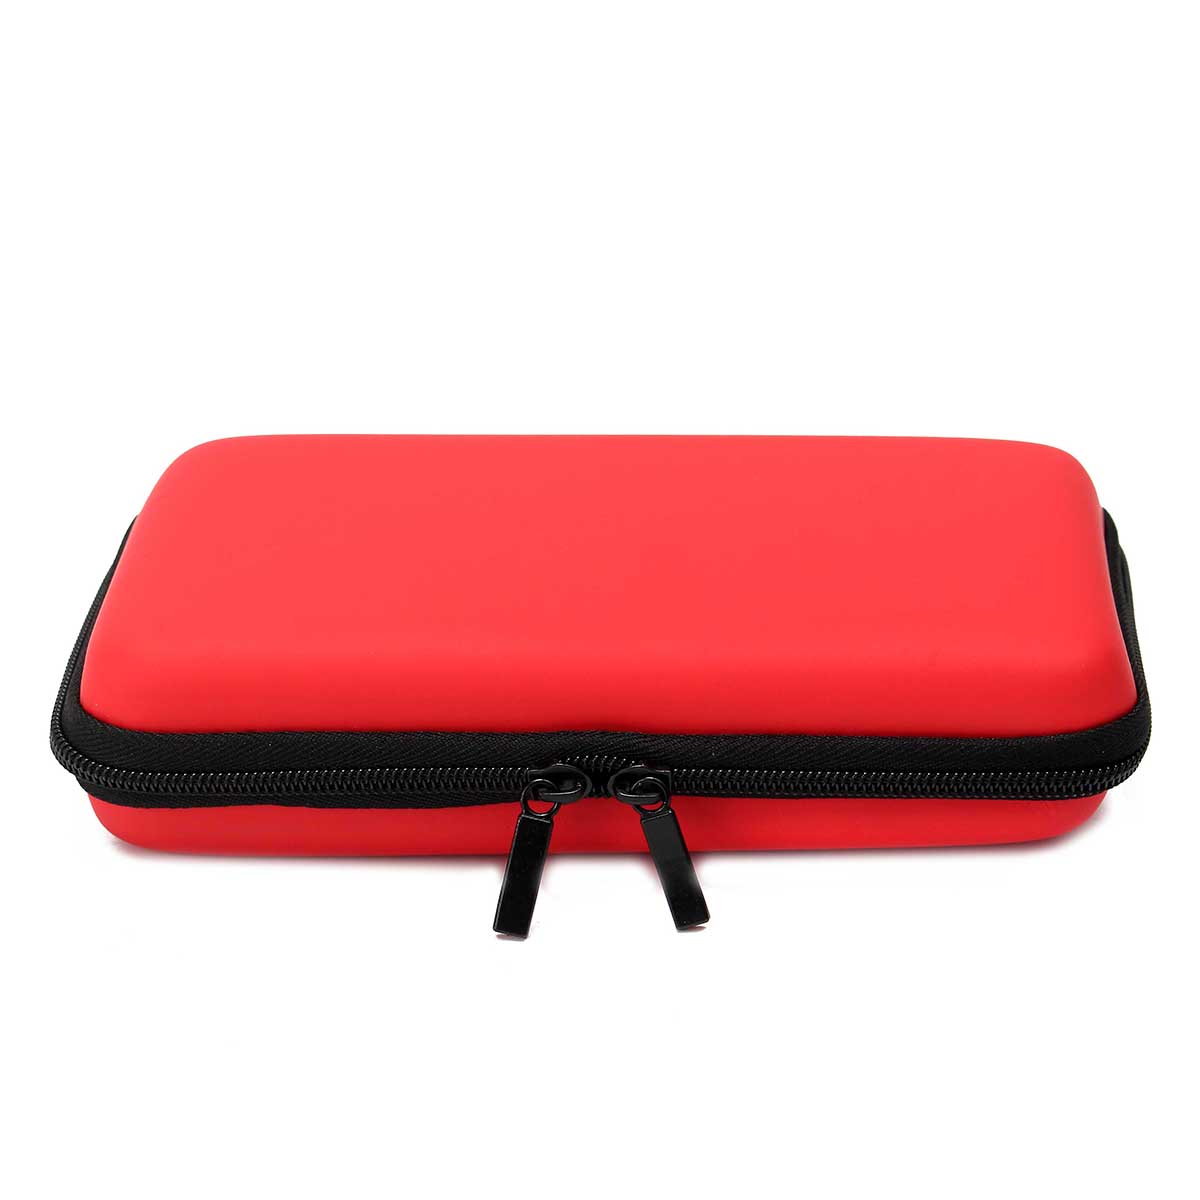 EVA Hard Protective Carrying Case Cover Handle Bag For Nintendo New 2DS LL/XL 12